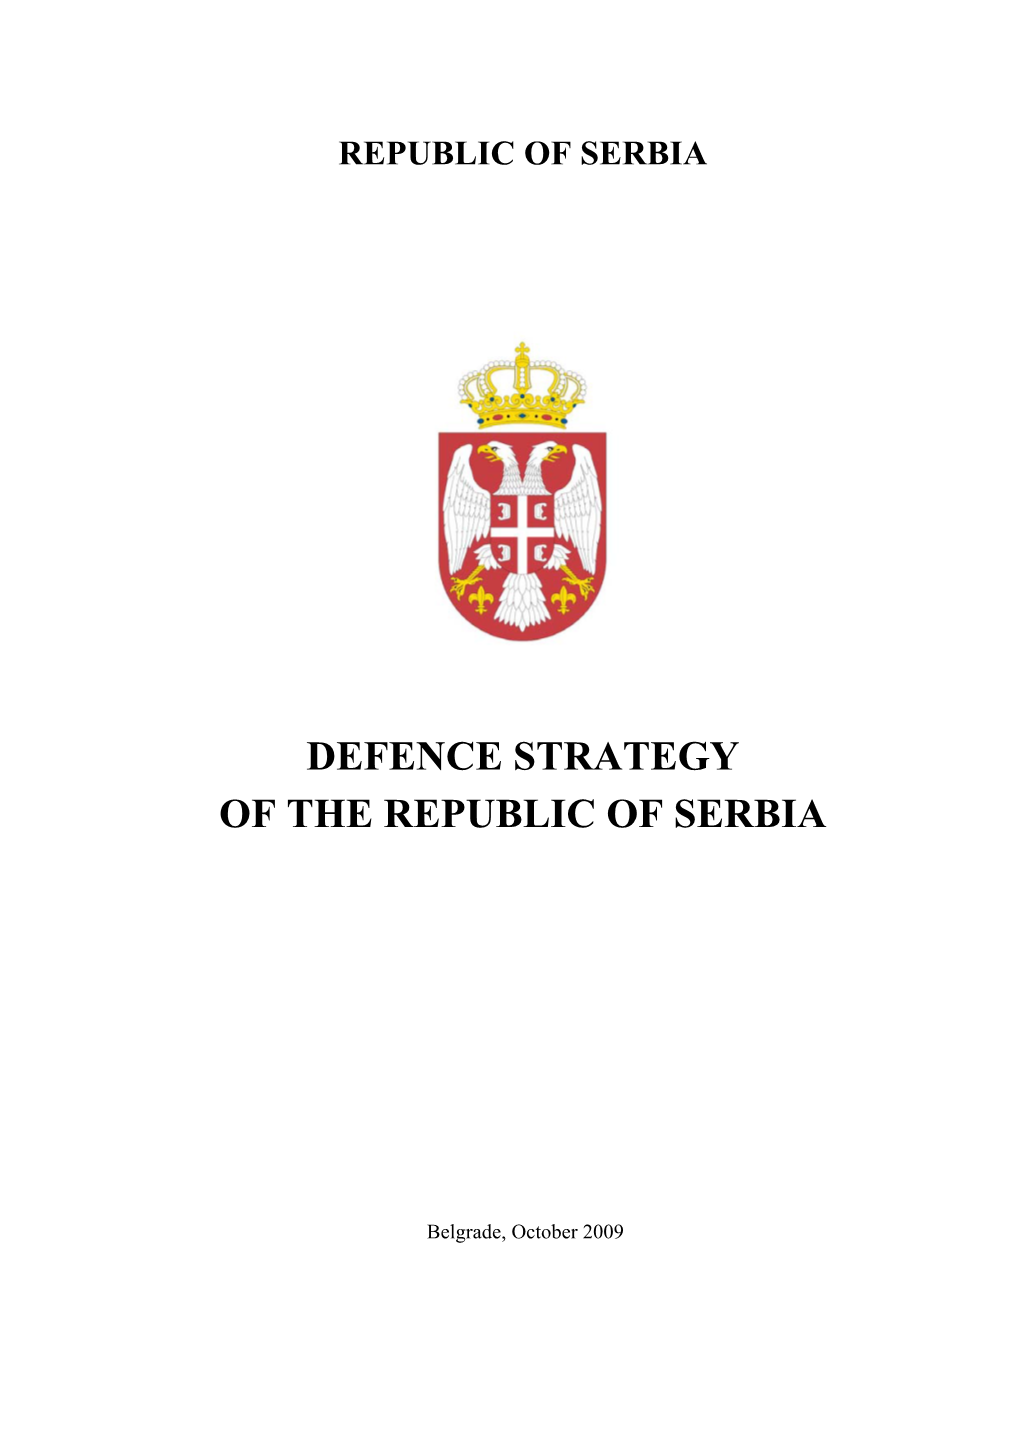 Defence Strategy of the Republic of Serbia